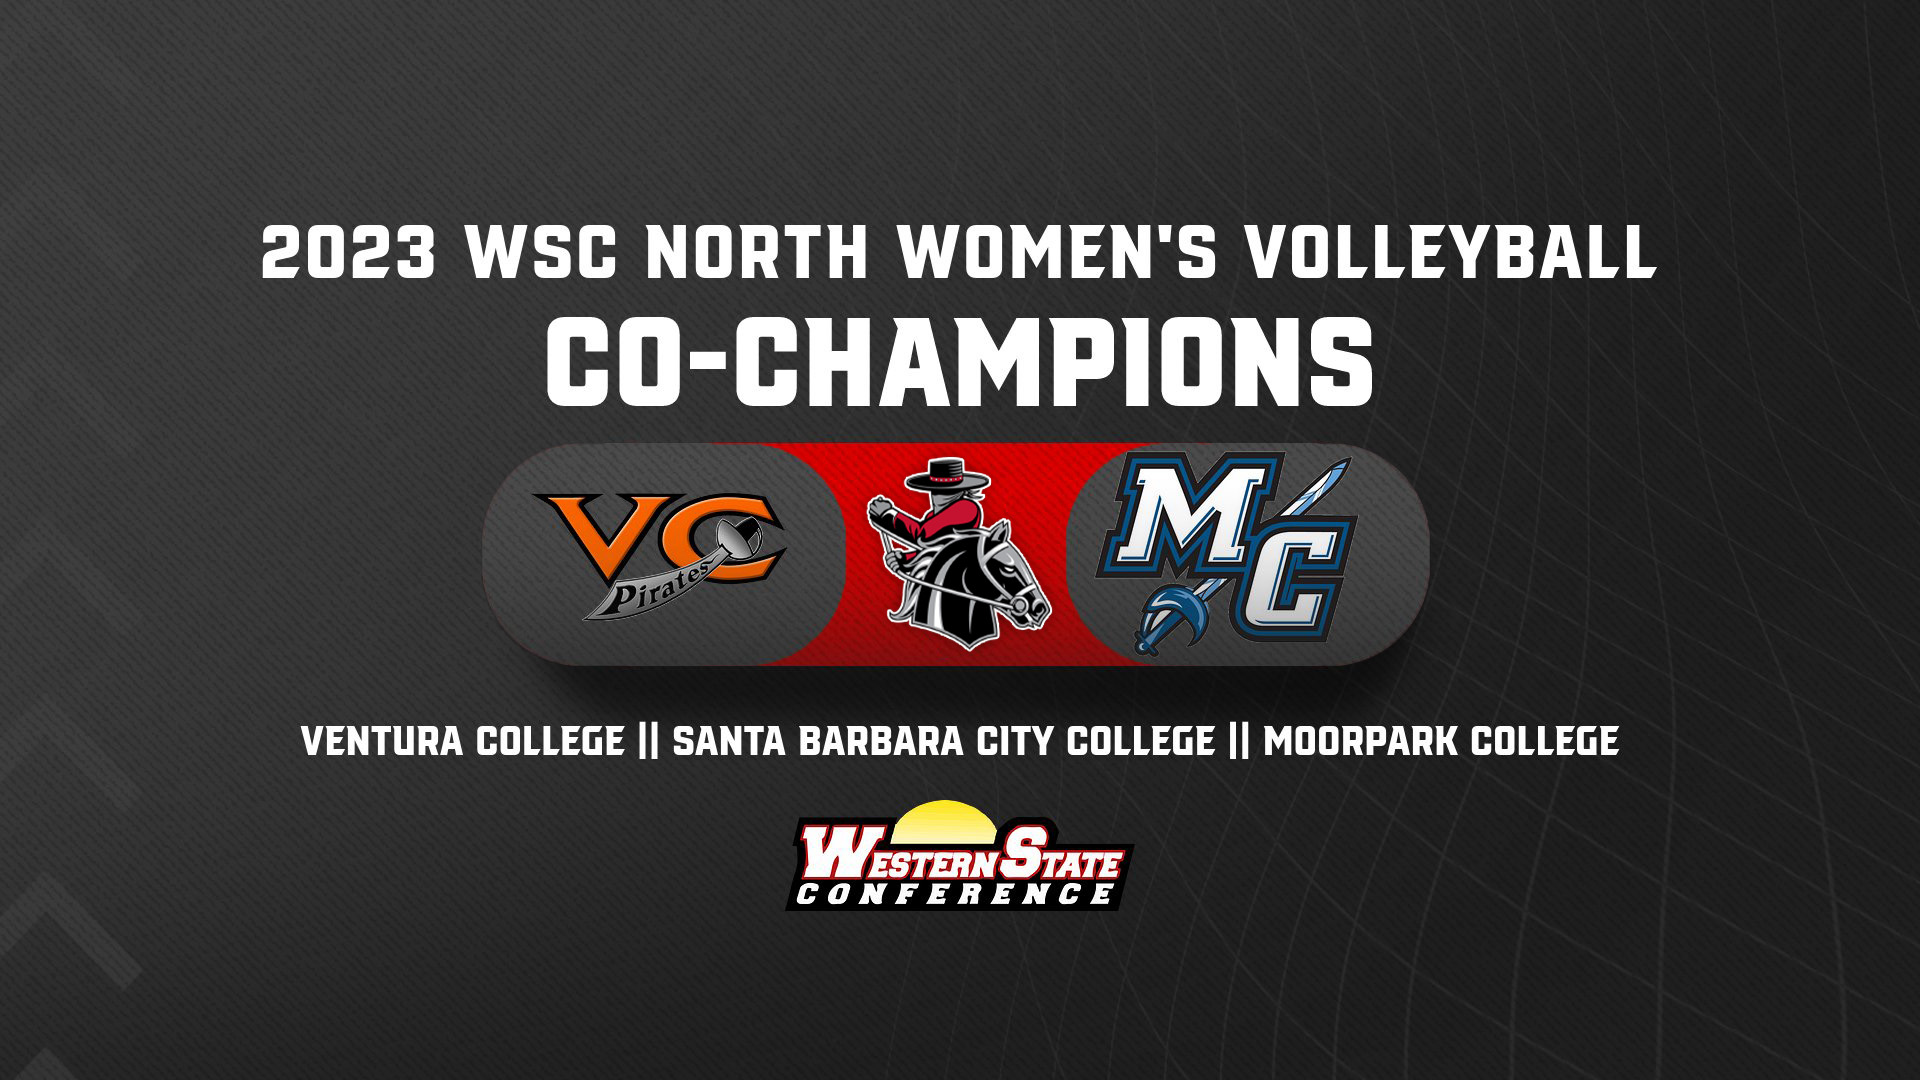 Women's Volleyball: Three Teams Tie for WSC North Championship